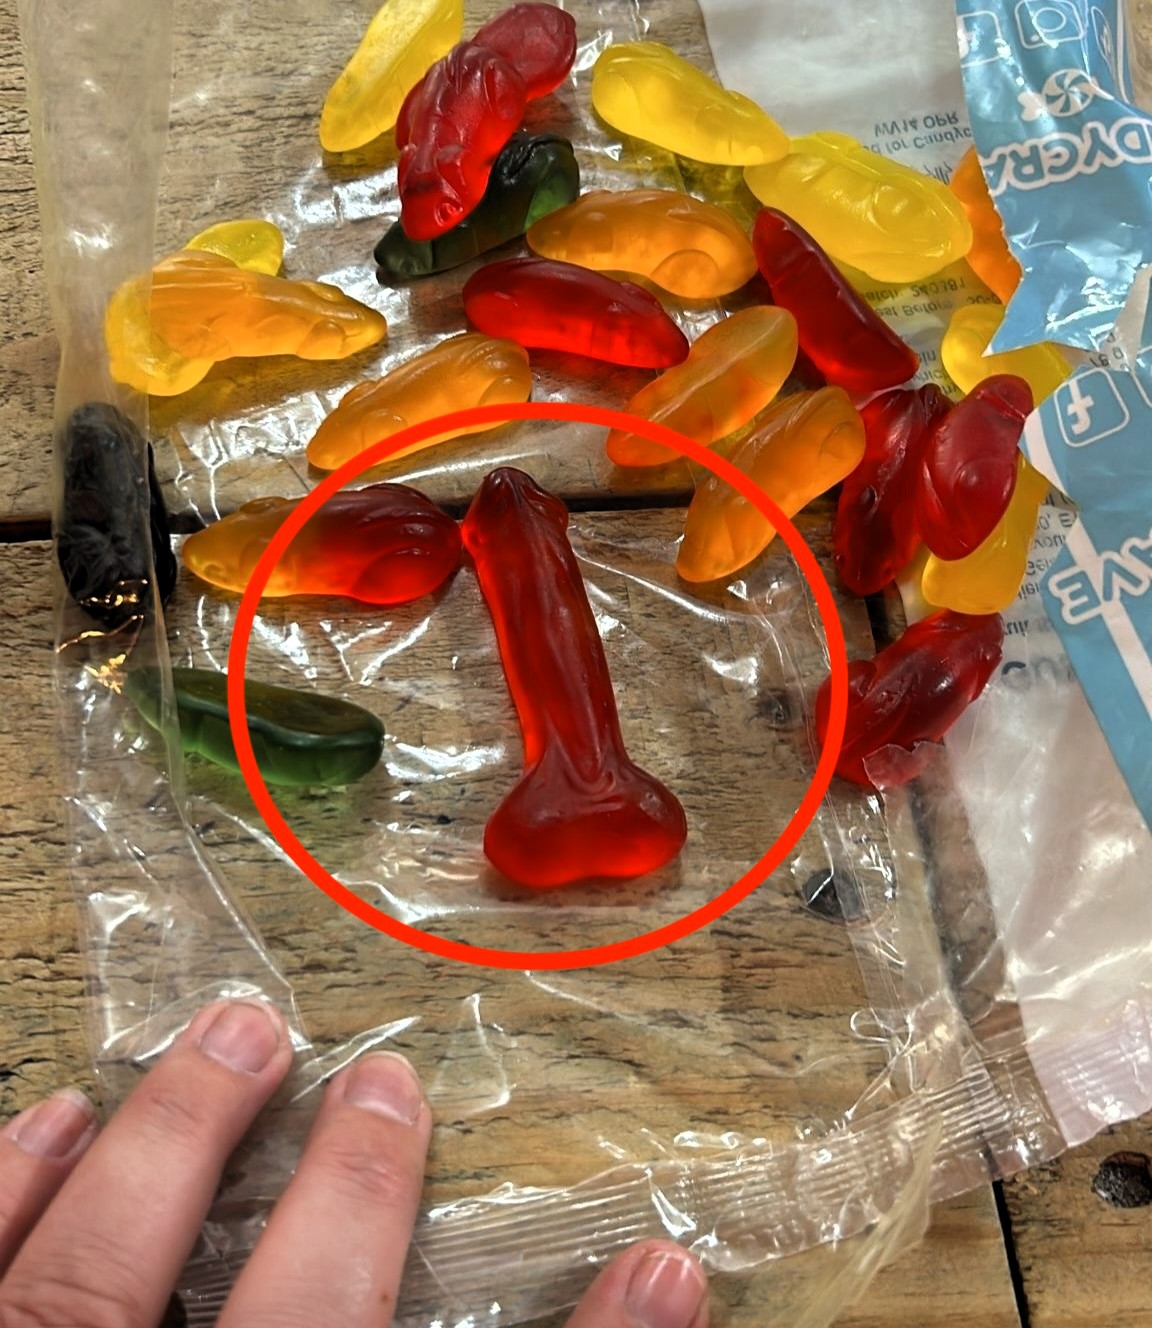 Sweet shop owner horrified to find a phallic jelly among gummy mice. Joanne Dollard of Padstow, Cornwall, discovered the surprise while preparing treats, sparking laughter and confusion.